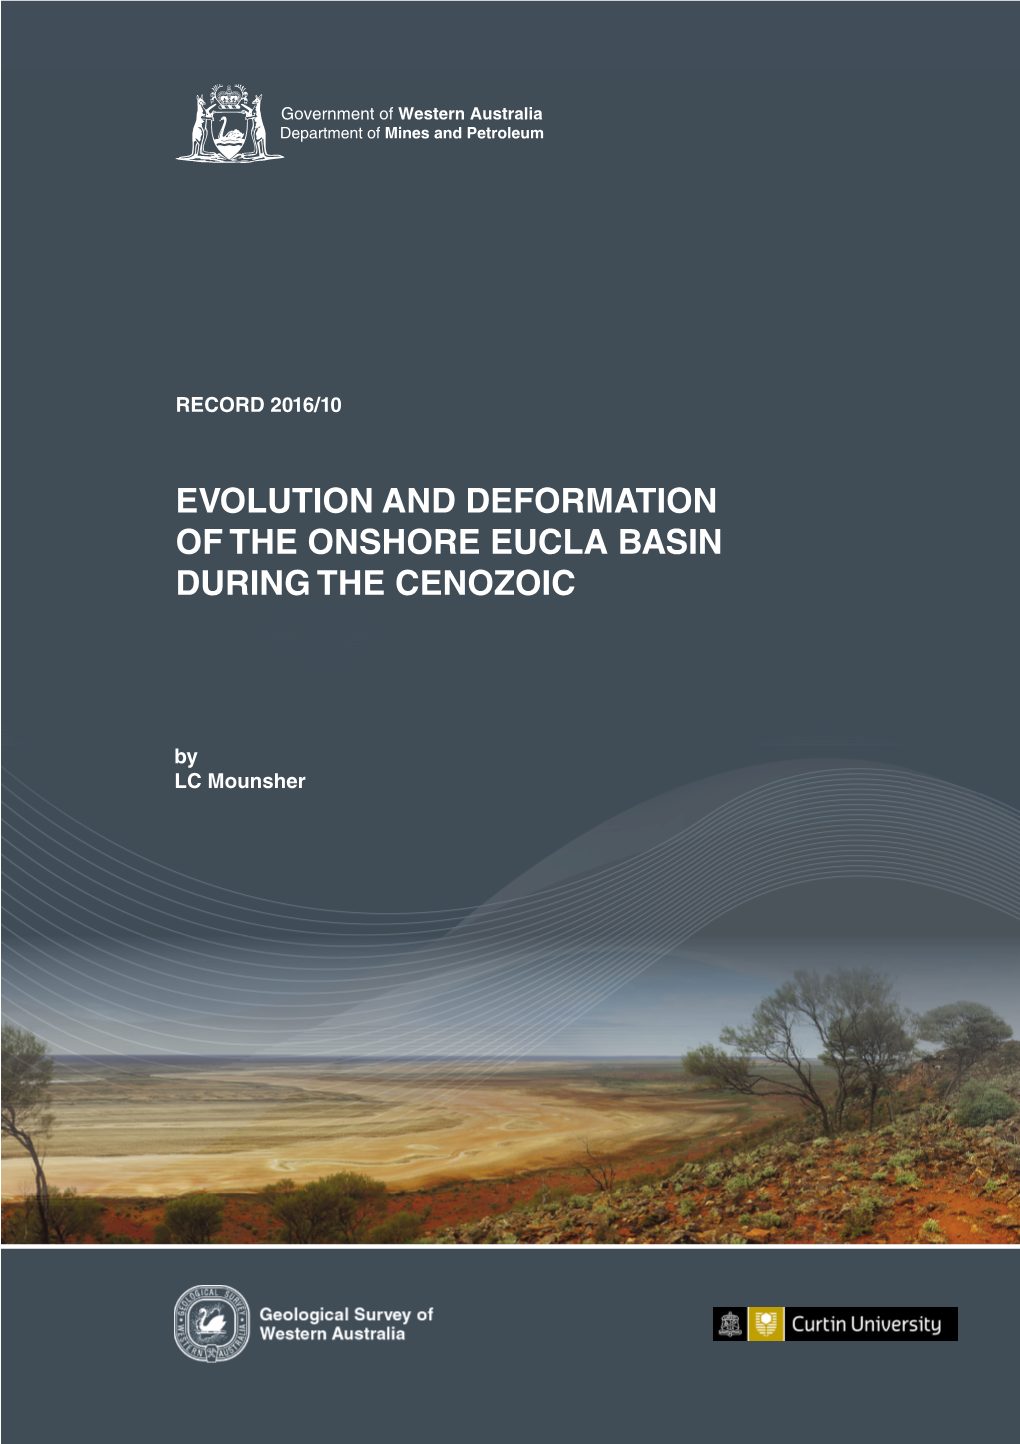 Evolution and Deformation of the Onshore Eucla Basin During the Cenozoic